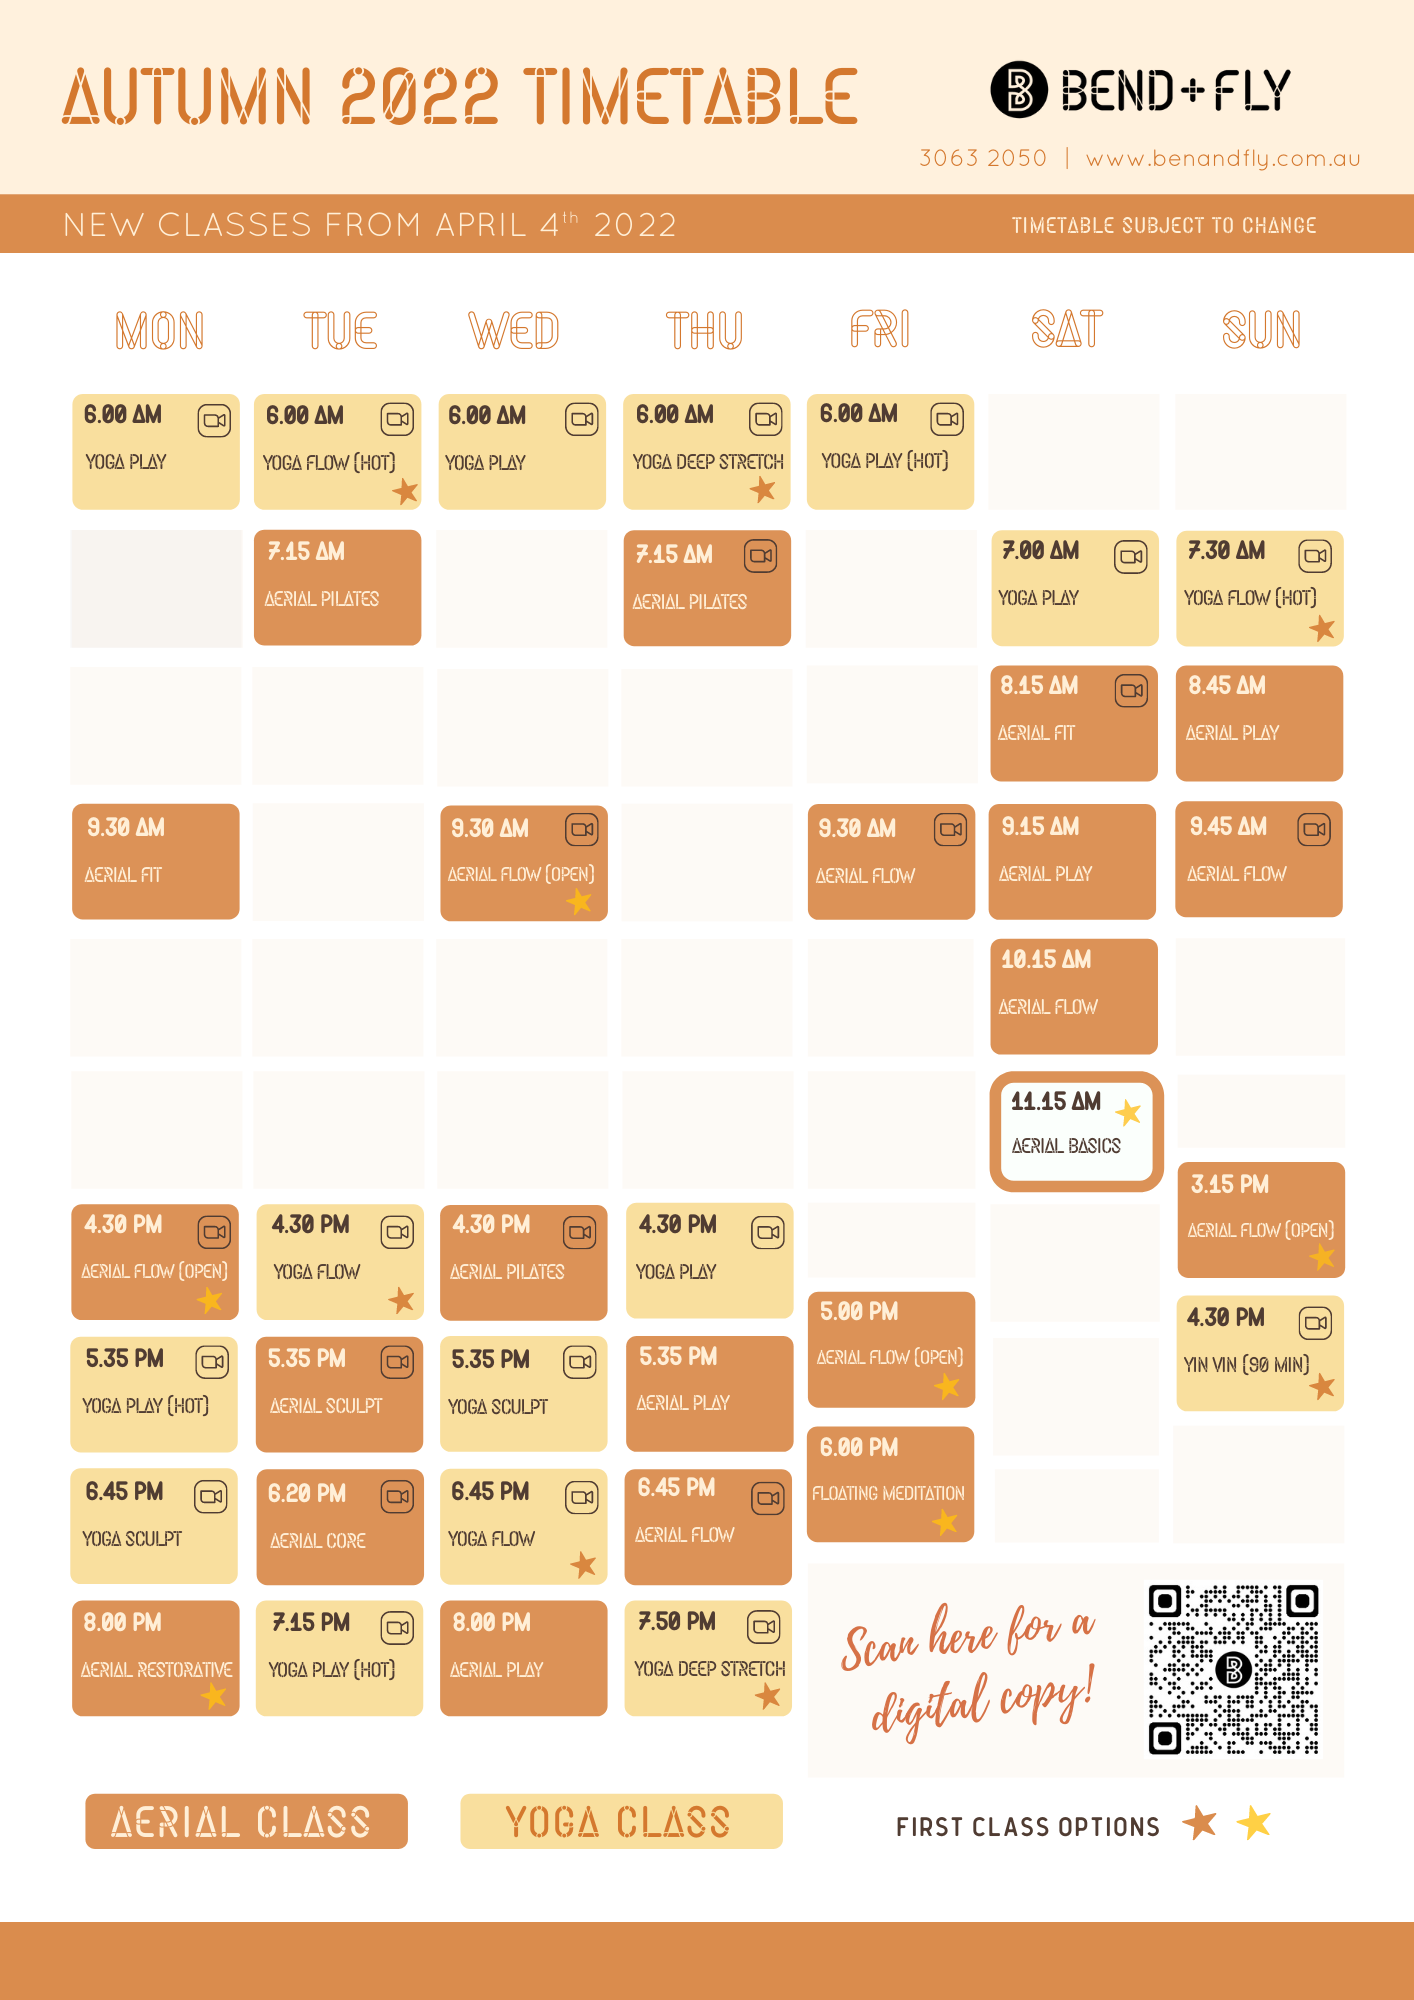 Downloadable Timetable